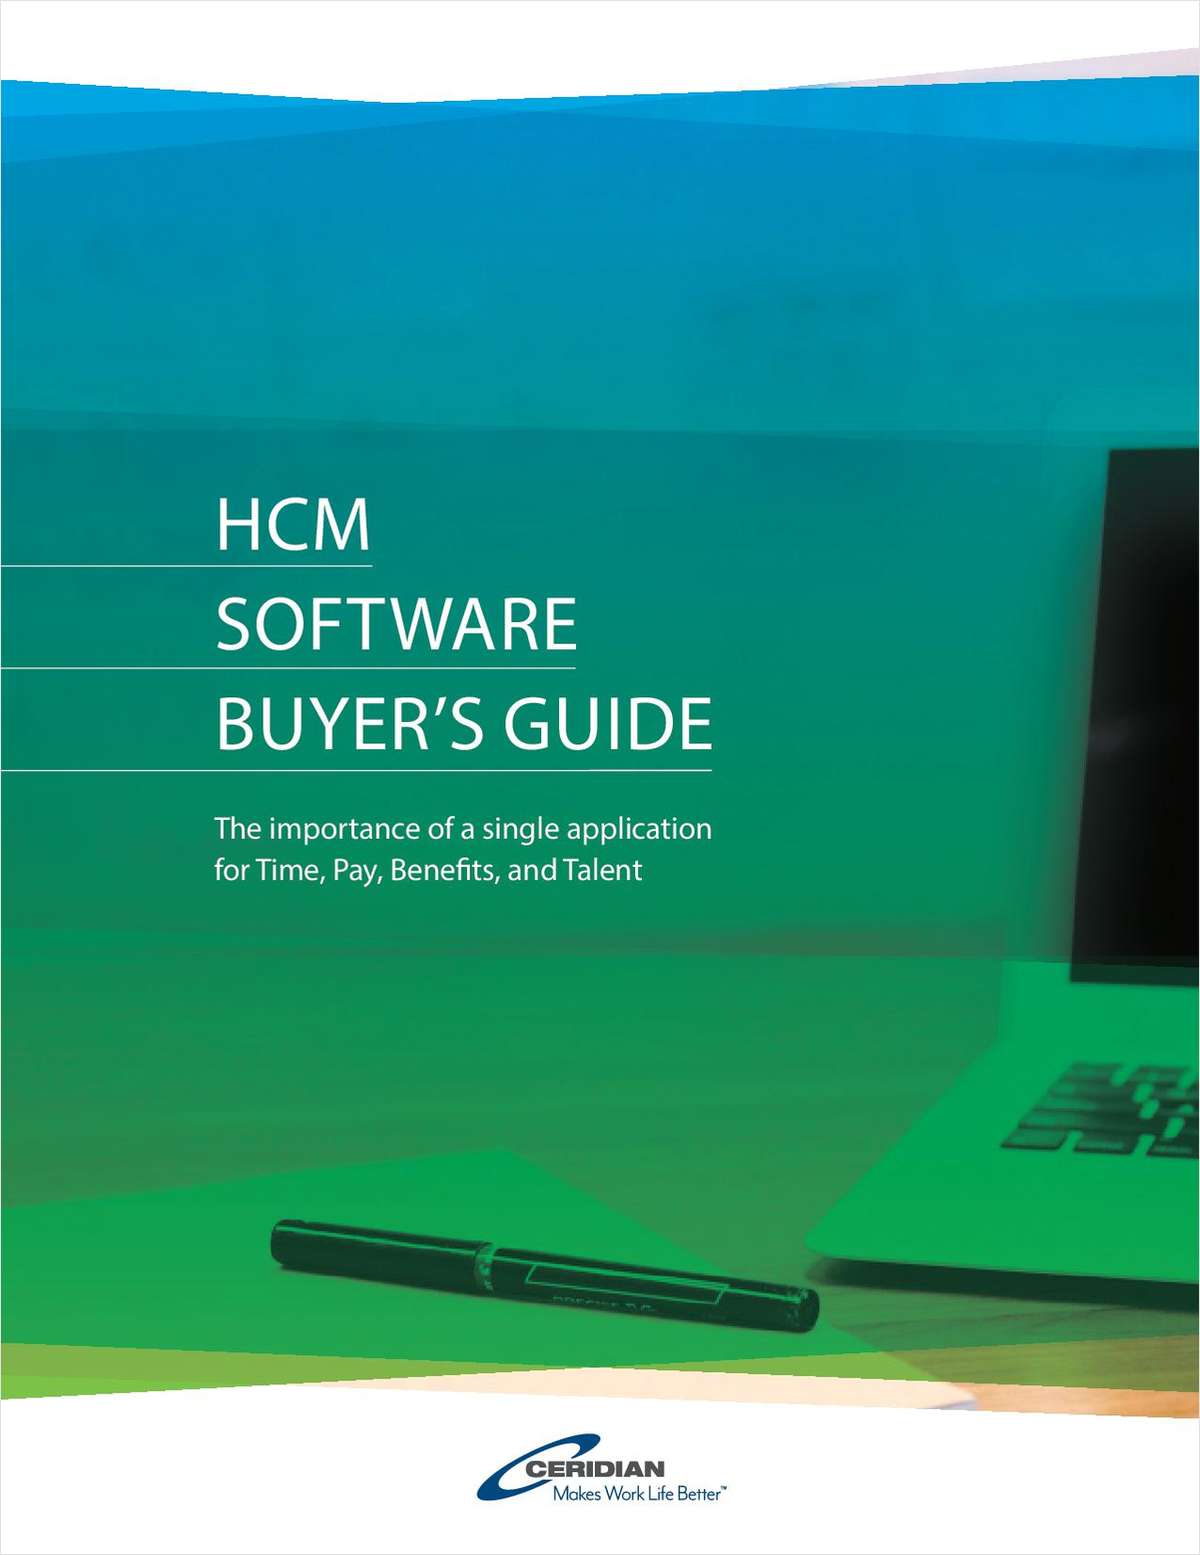 HCM Software Buyer's Guide